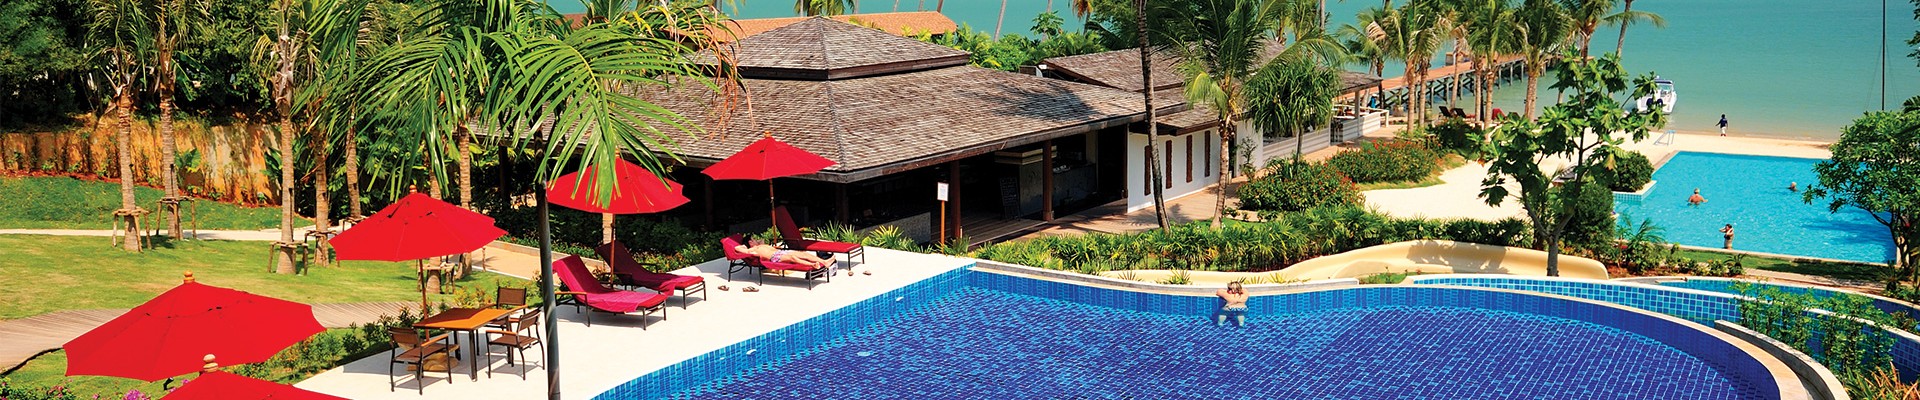 5* Barcelo Coconut Island - Thailand Package (7 nights)